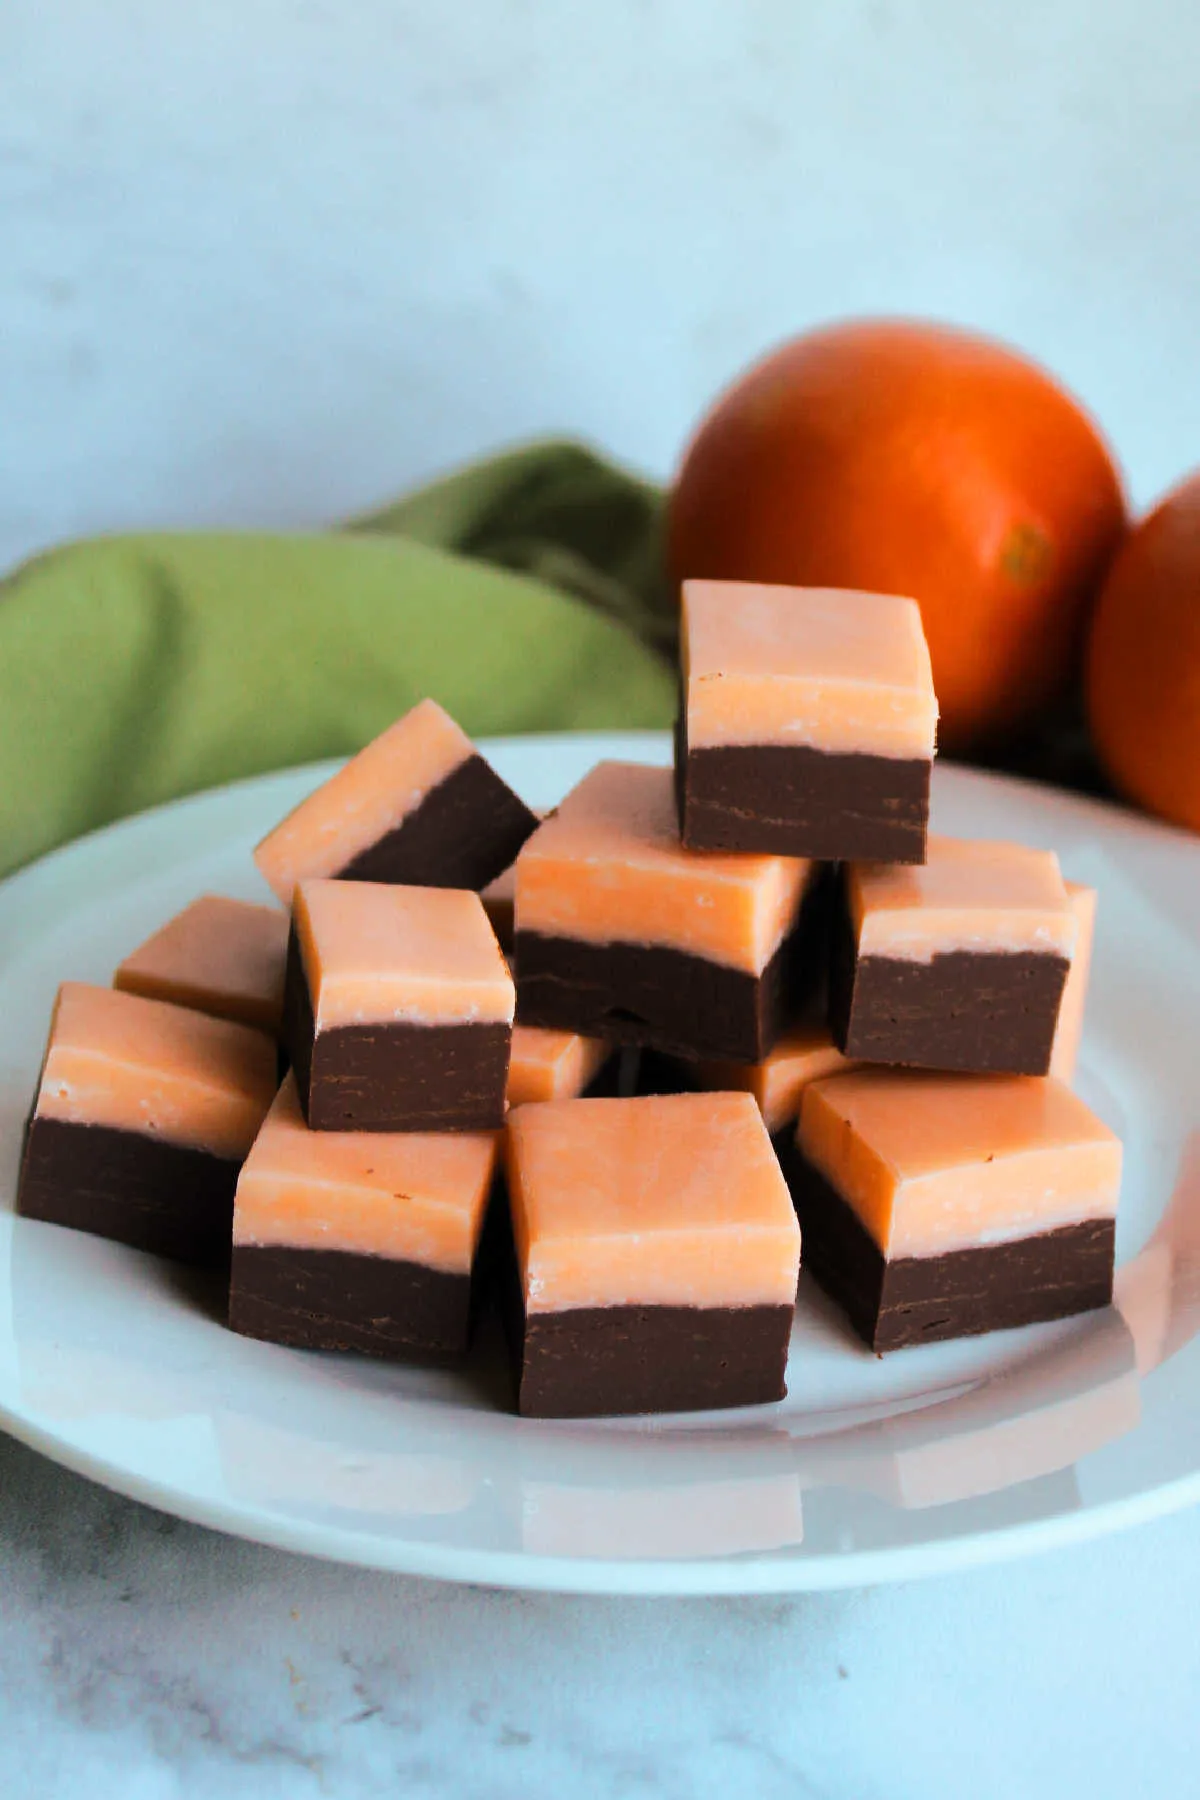 Pieces of chocolate orange fudge on plate with oranges in background.